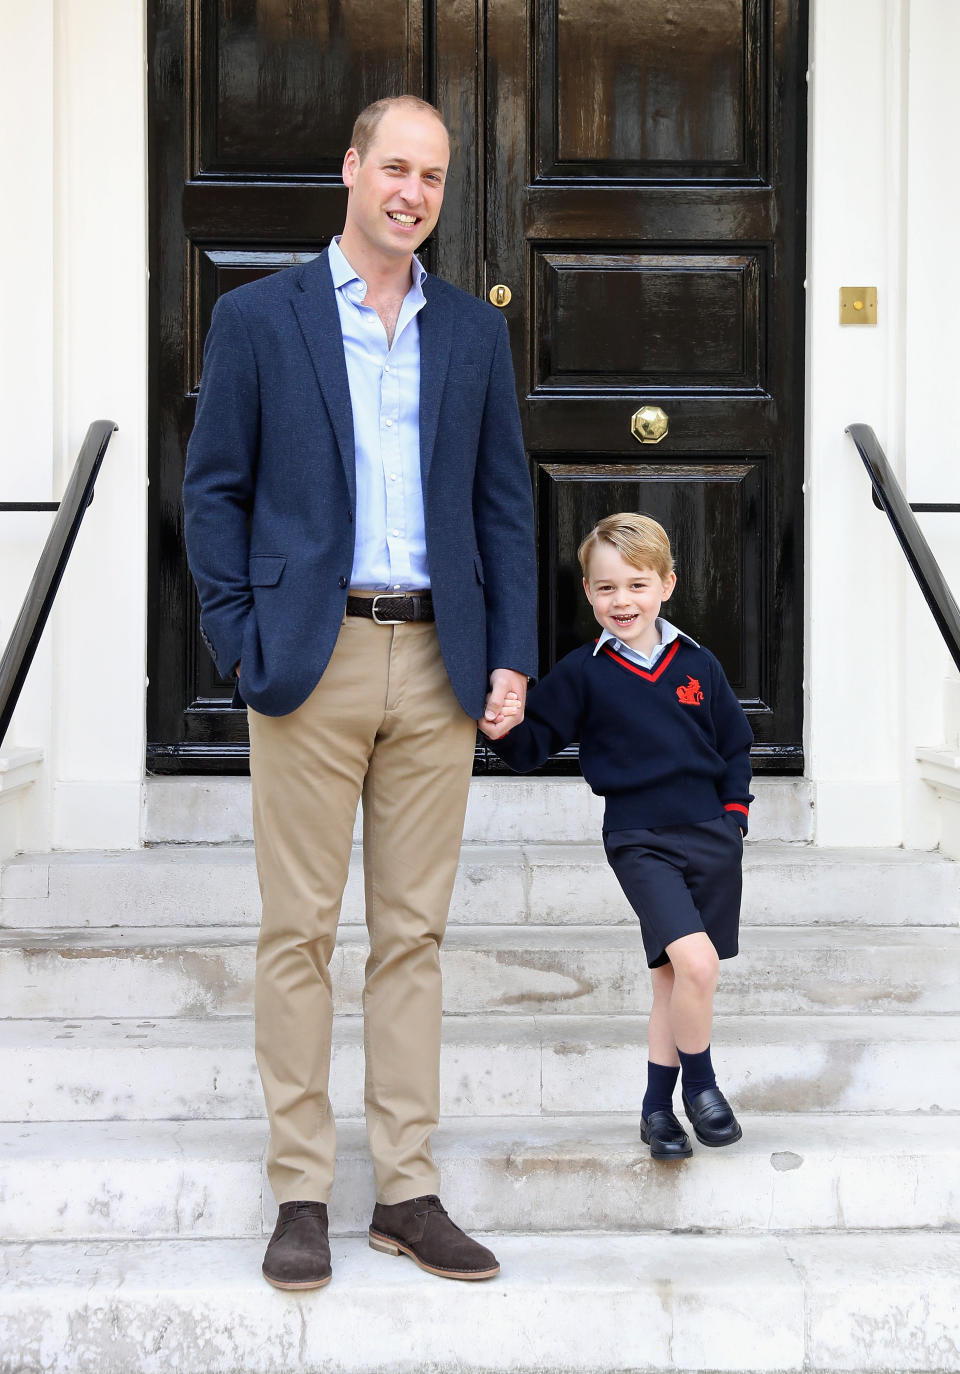 Prince William with Prince George on his first day of school at Thomas's Battersea on September 7, 2017, in London.